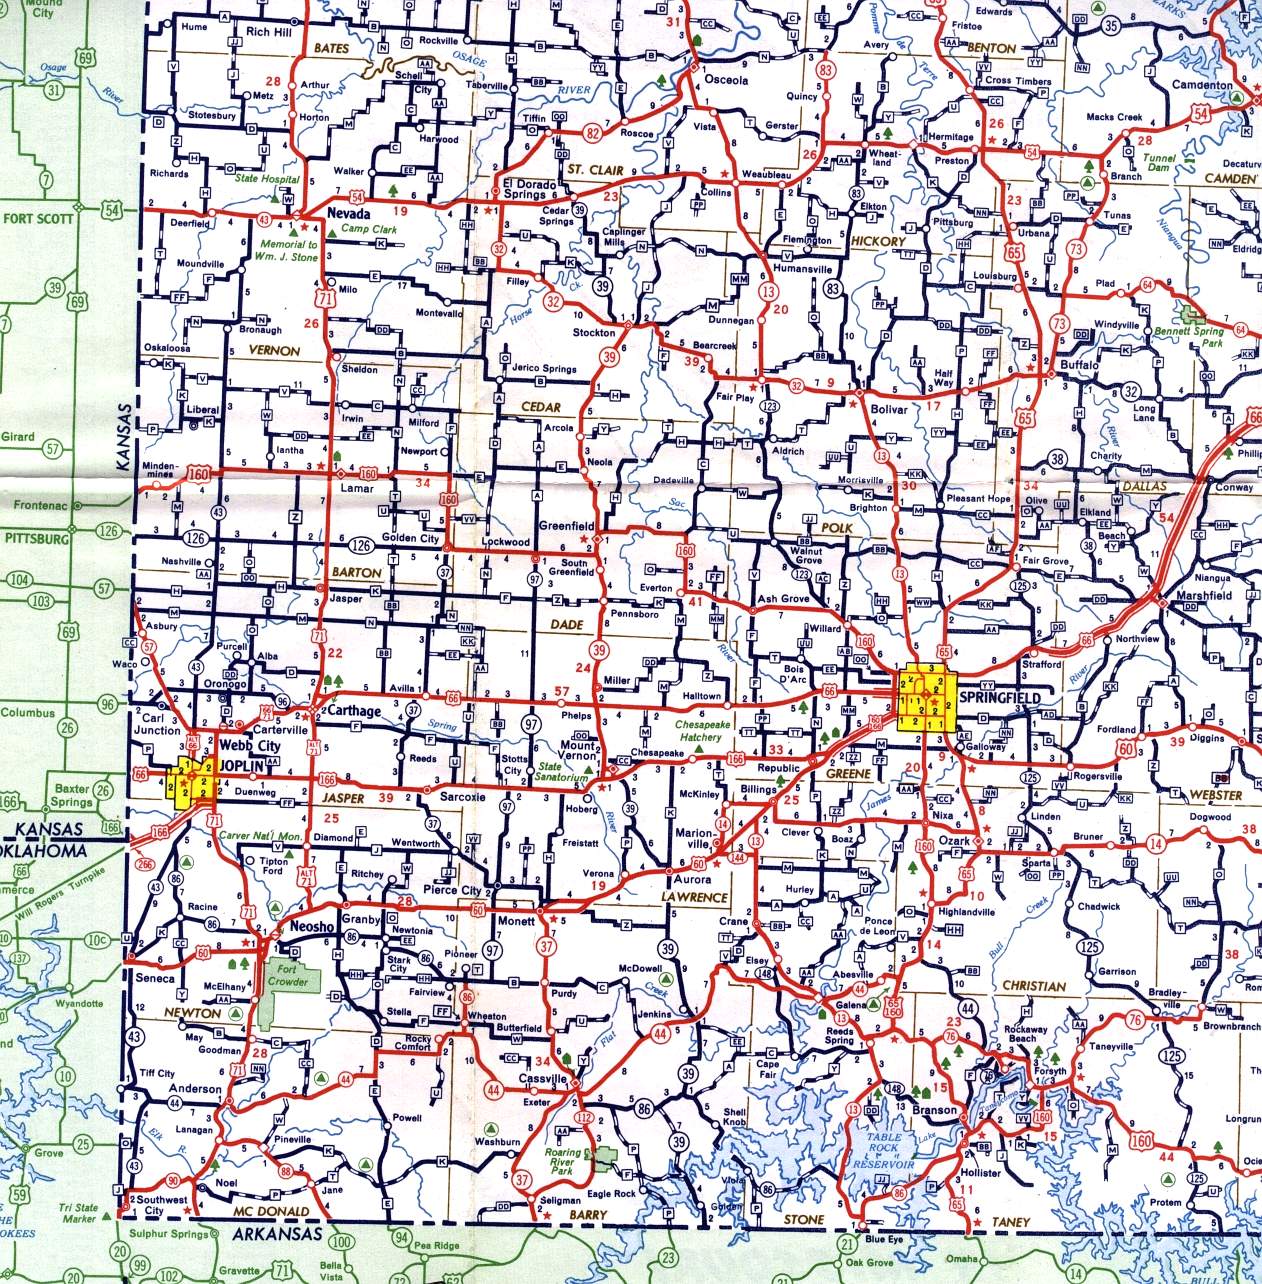 Southwest corner of Missouri from 1958 official highway map